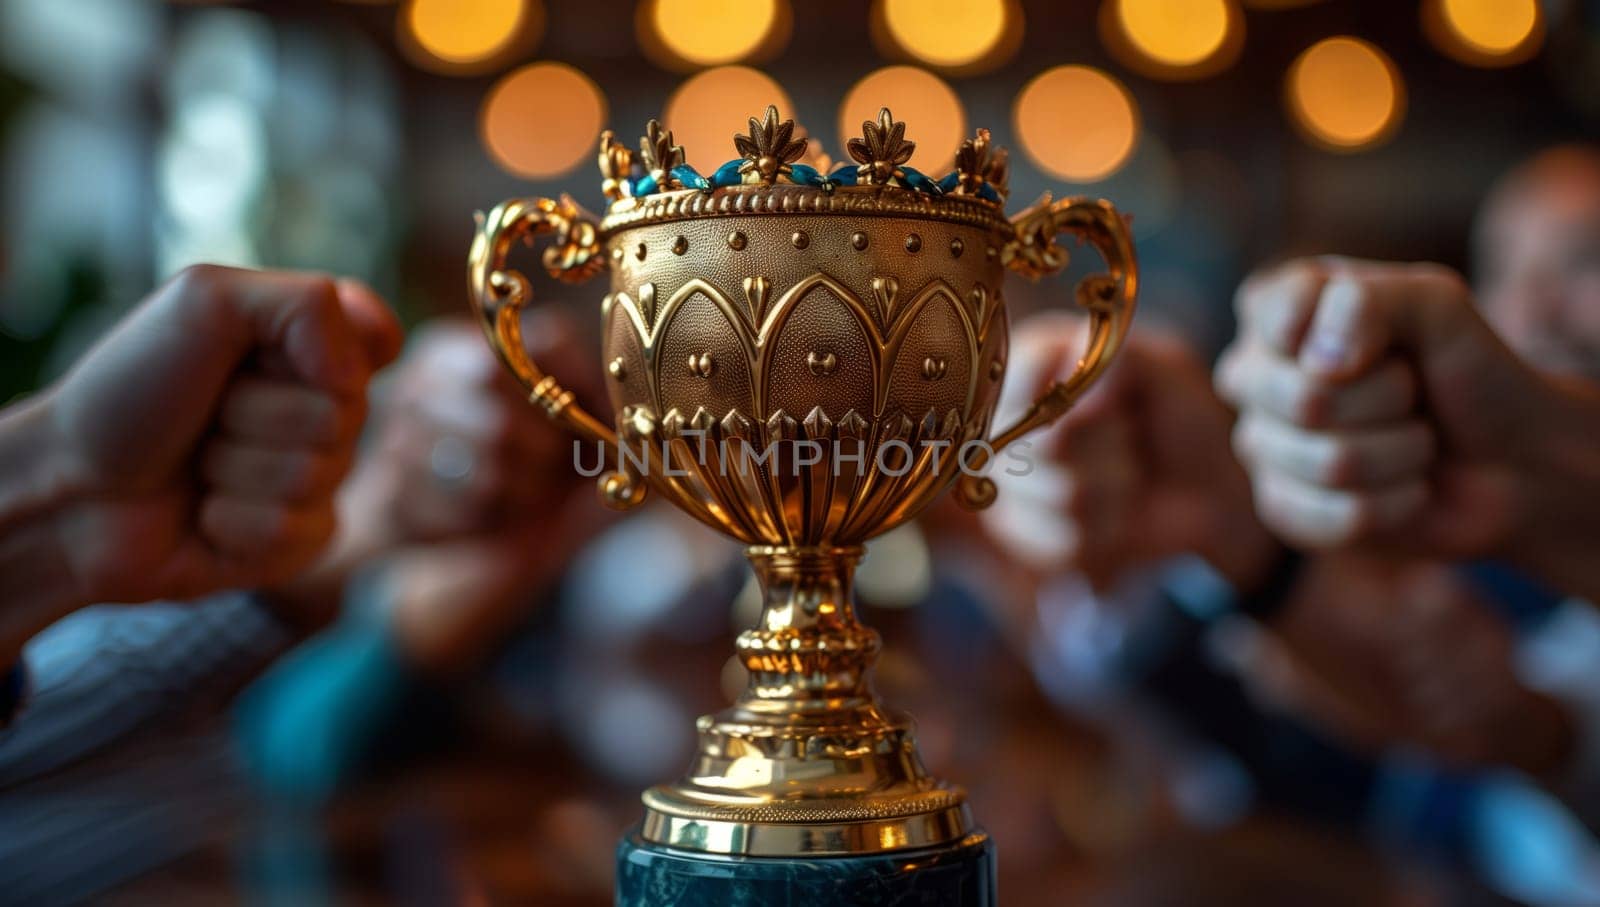 A group of individuals holding a prestigious gold trophy at a competition event in the city. The trophy symbolizes tradition and triumph in a place of worship